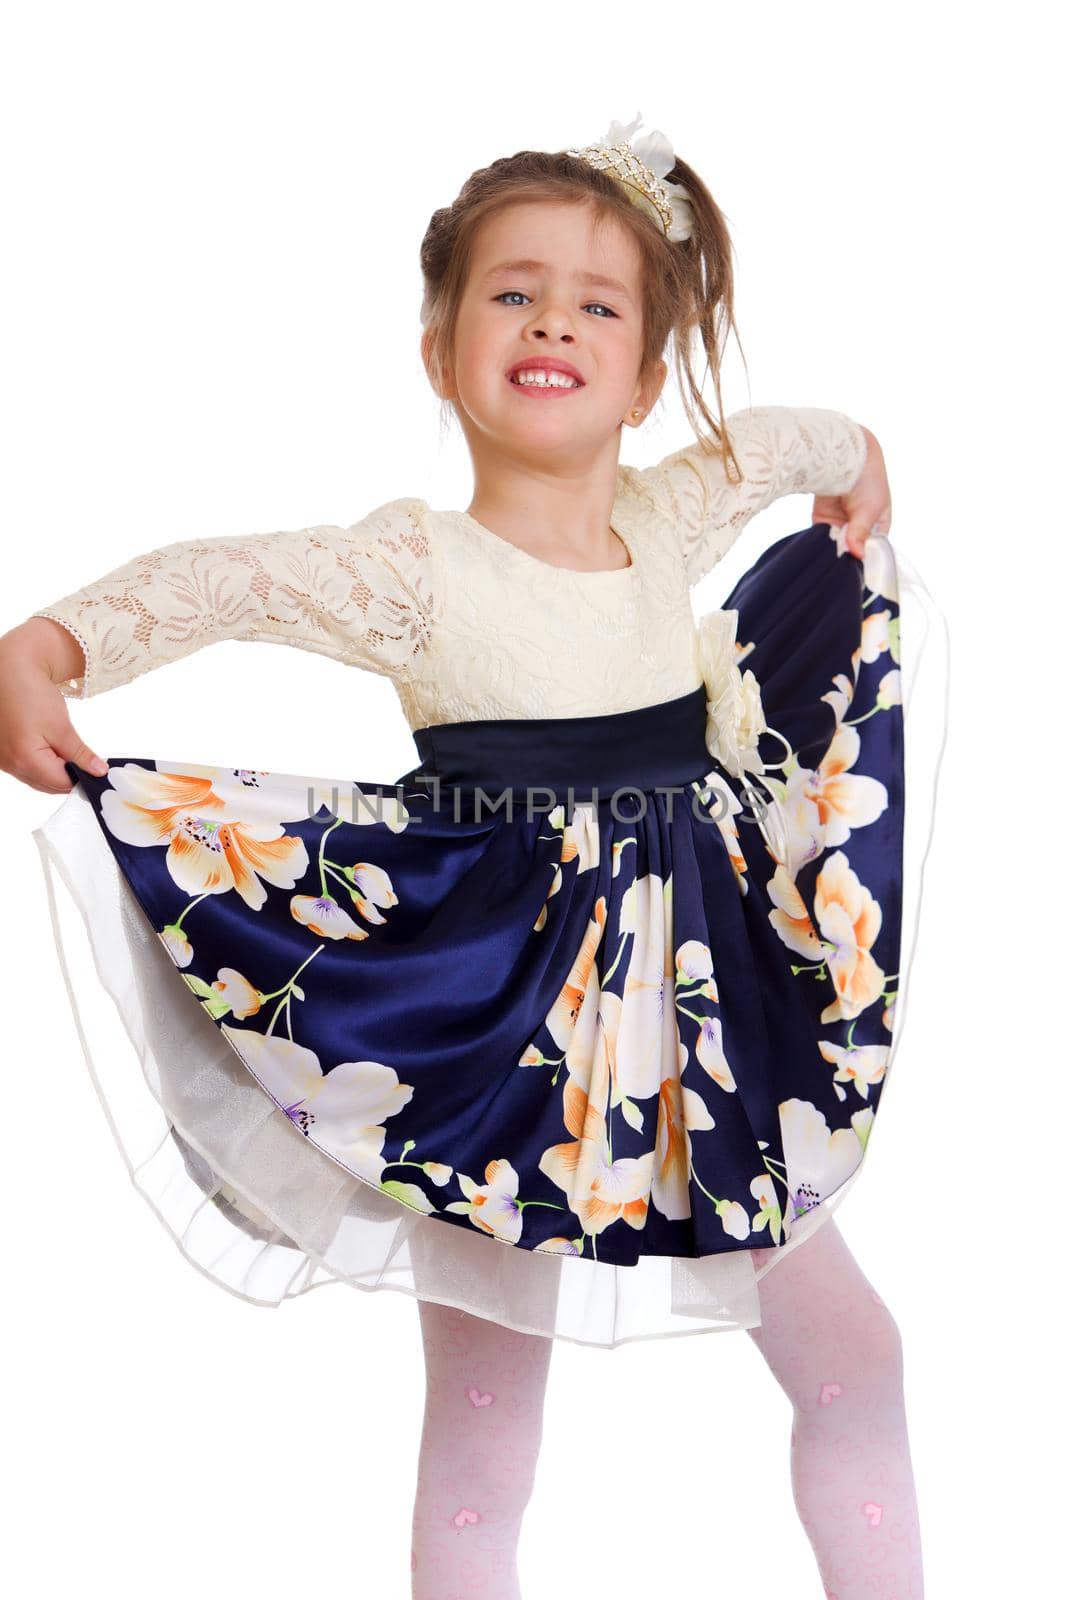 Charming girl holding the hem of her dress. Beautiful happy kid dressed nice dress and white tights standing against white background. Studio portrait of charming little girl